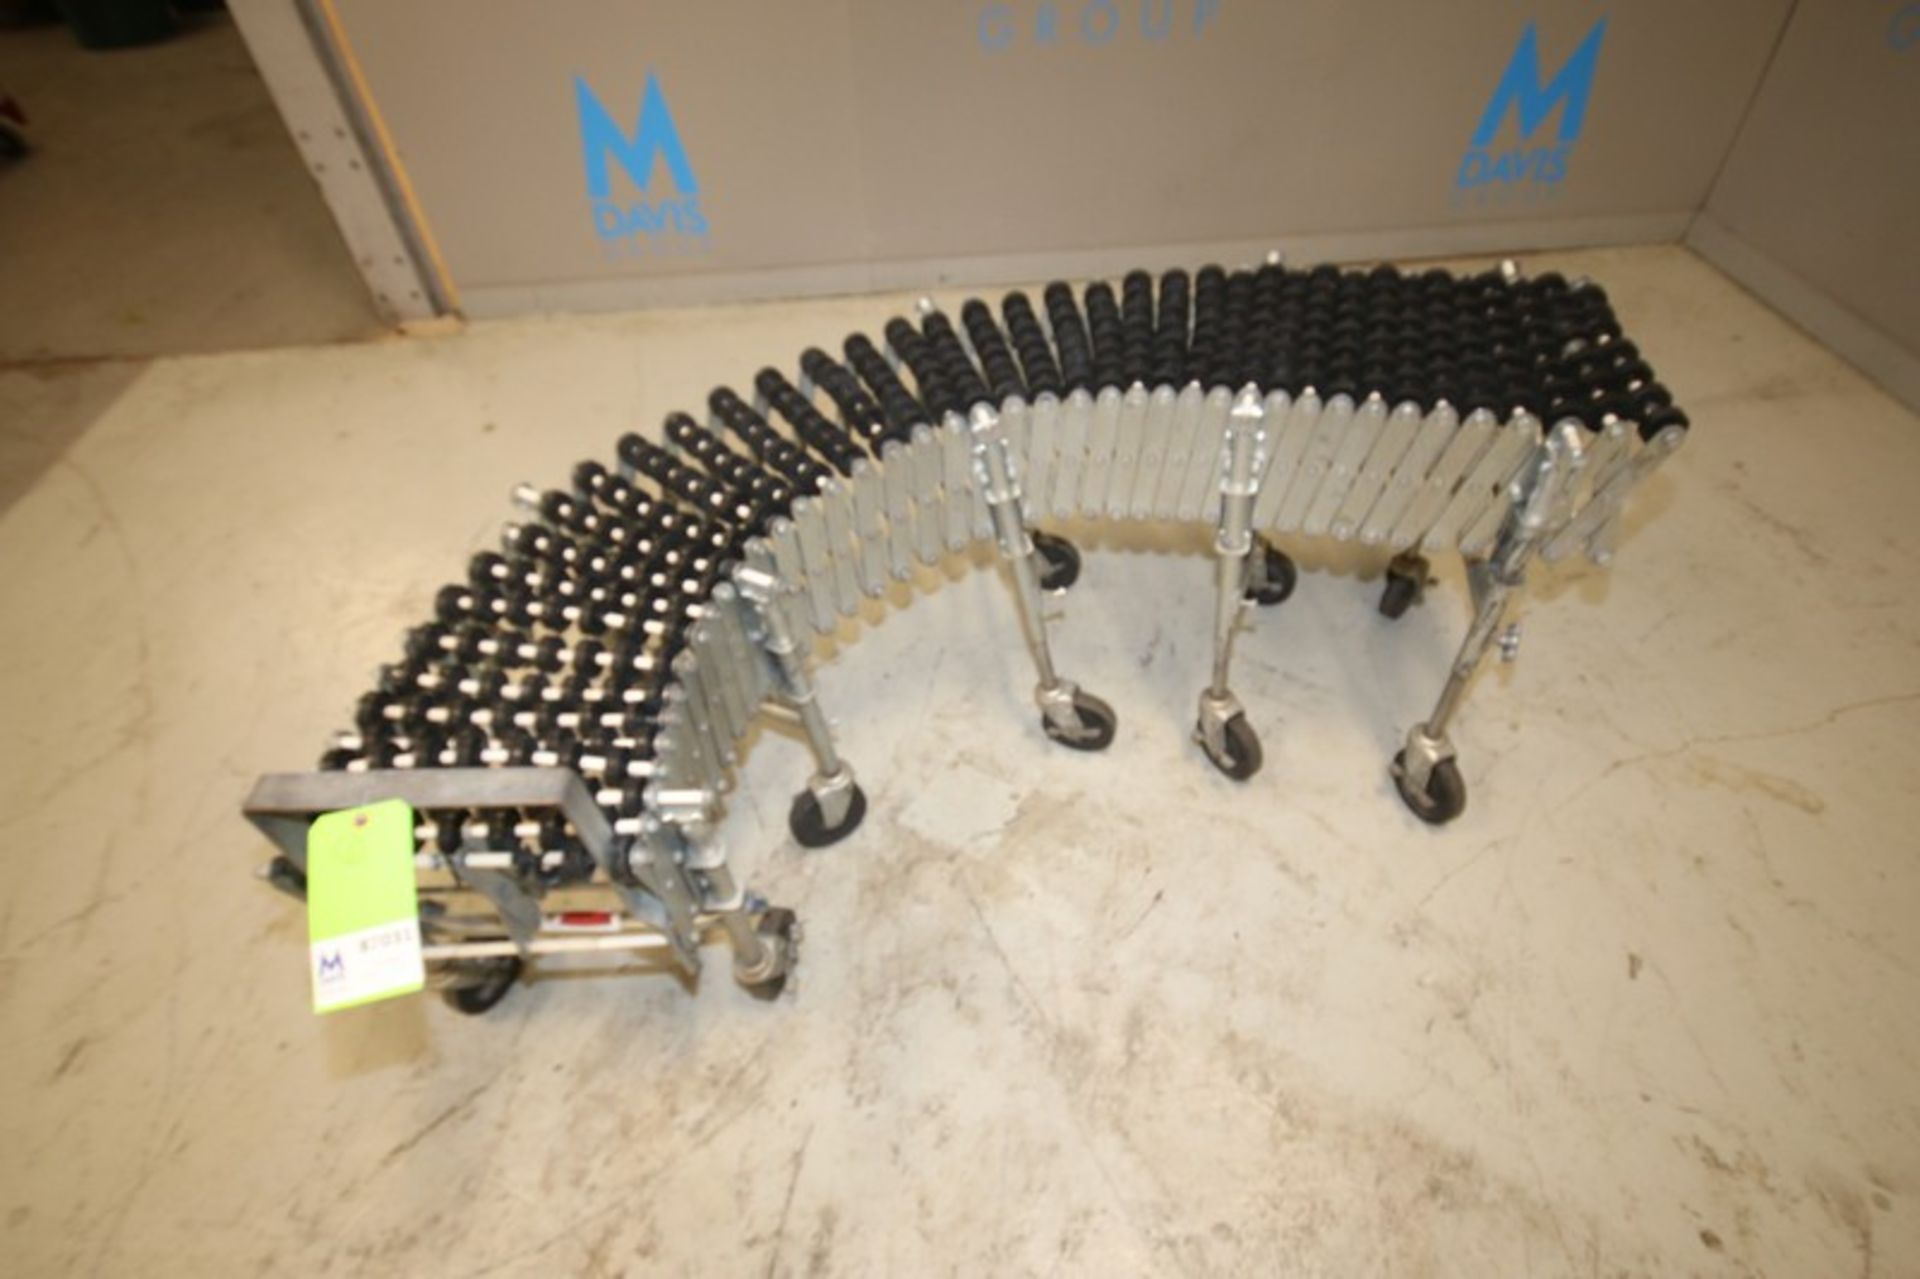 Nestaflex Portable Flexible Conveyor, 14" W up to 16' L (INV#87031)(Located @ the MDG Auction